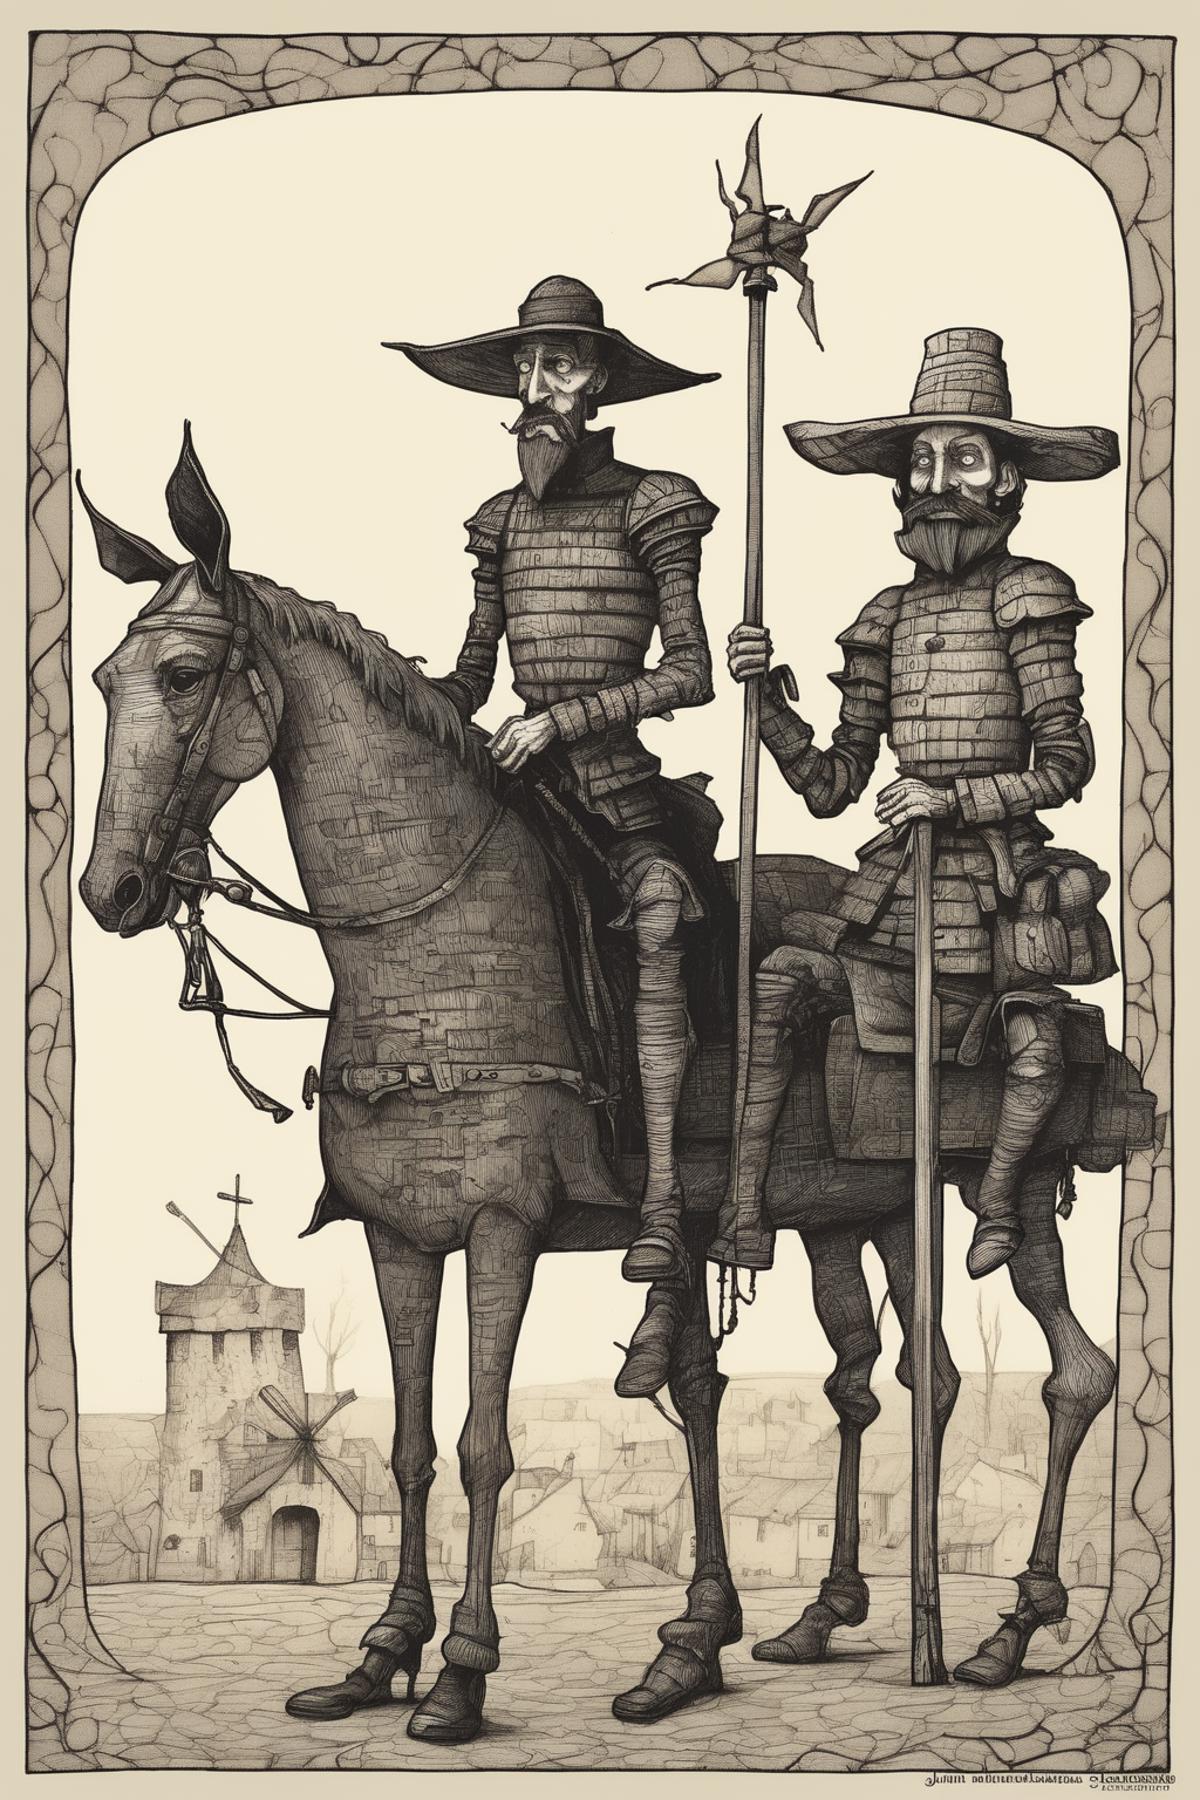 Drawing of Two Men in Armor Riding Horses and Holding Flags